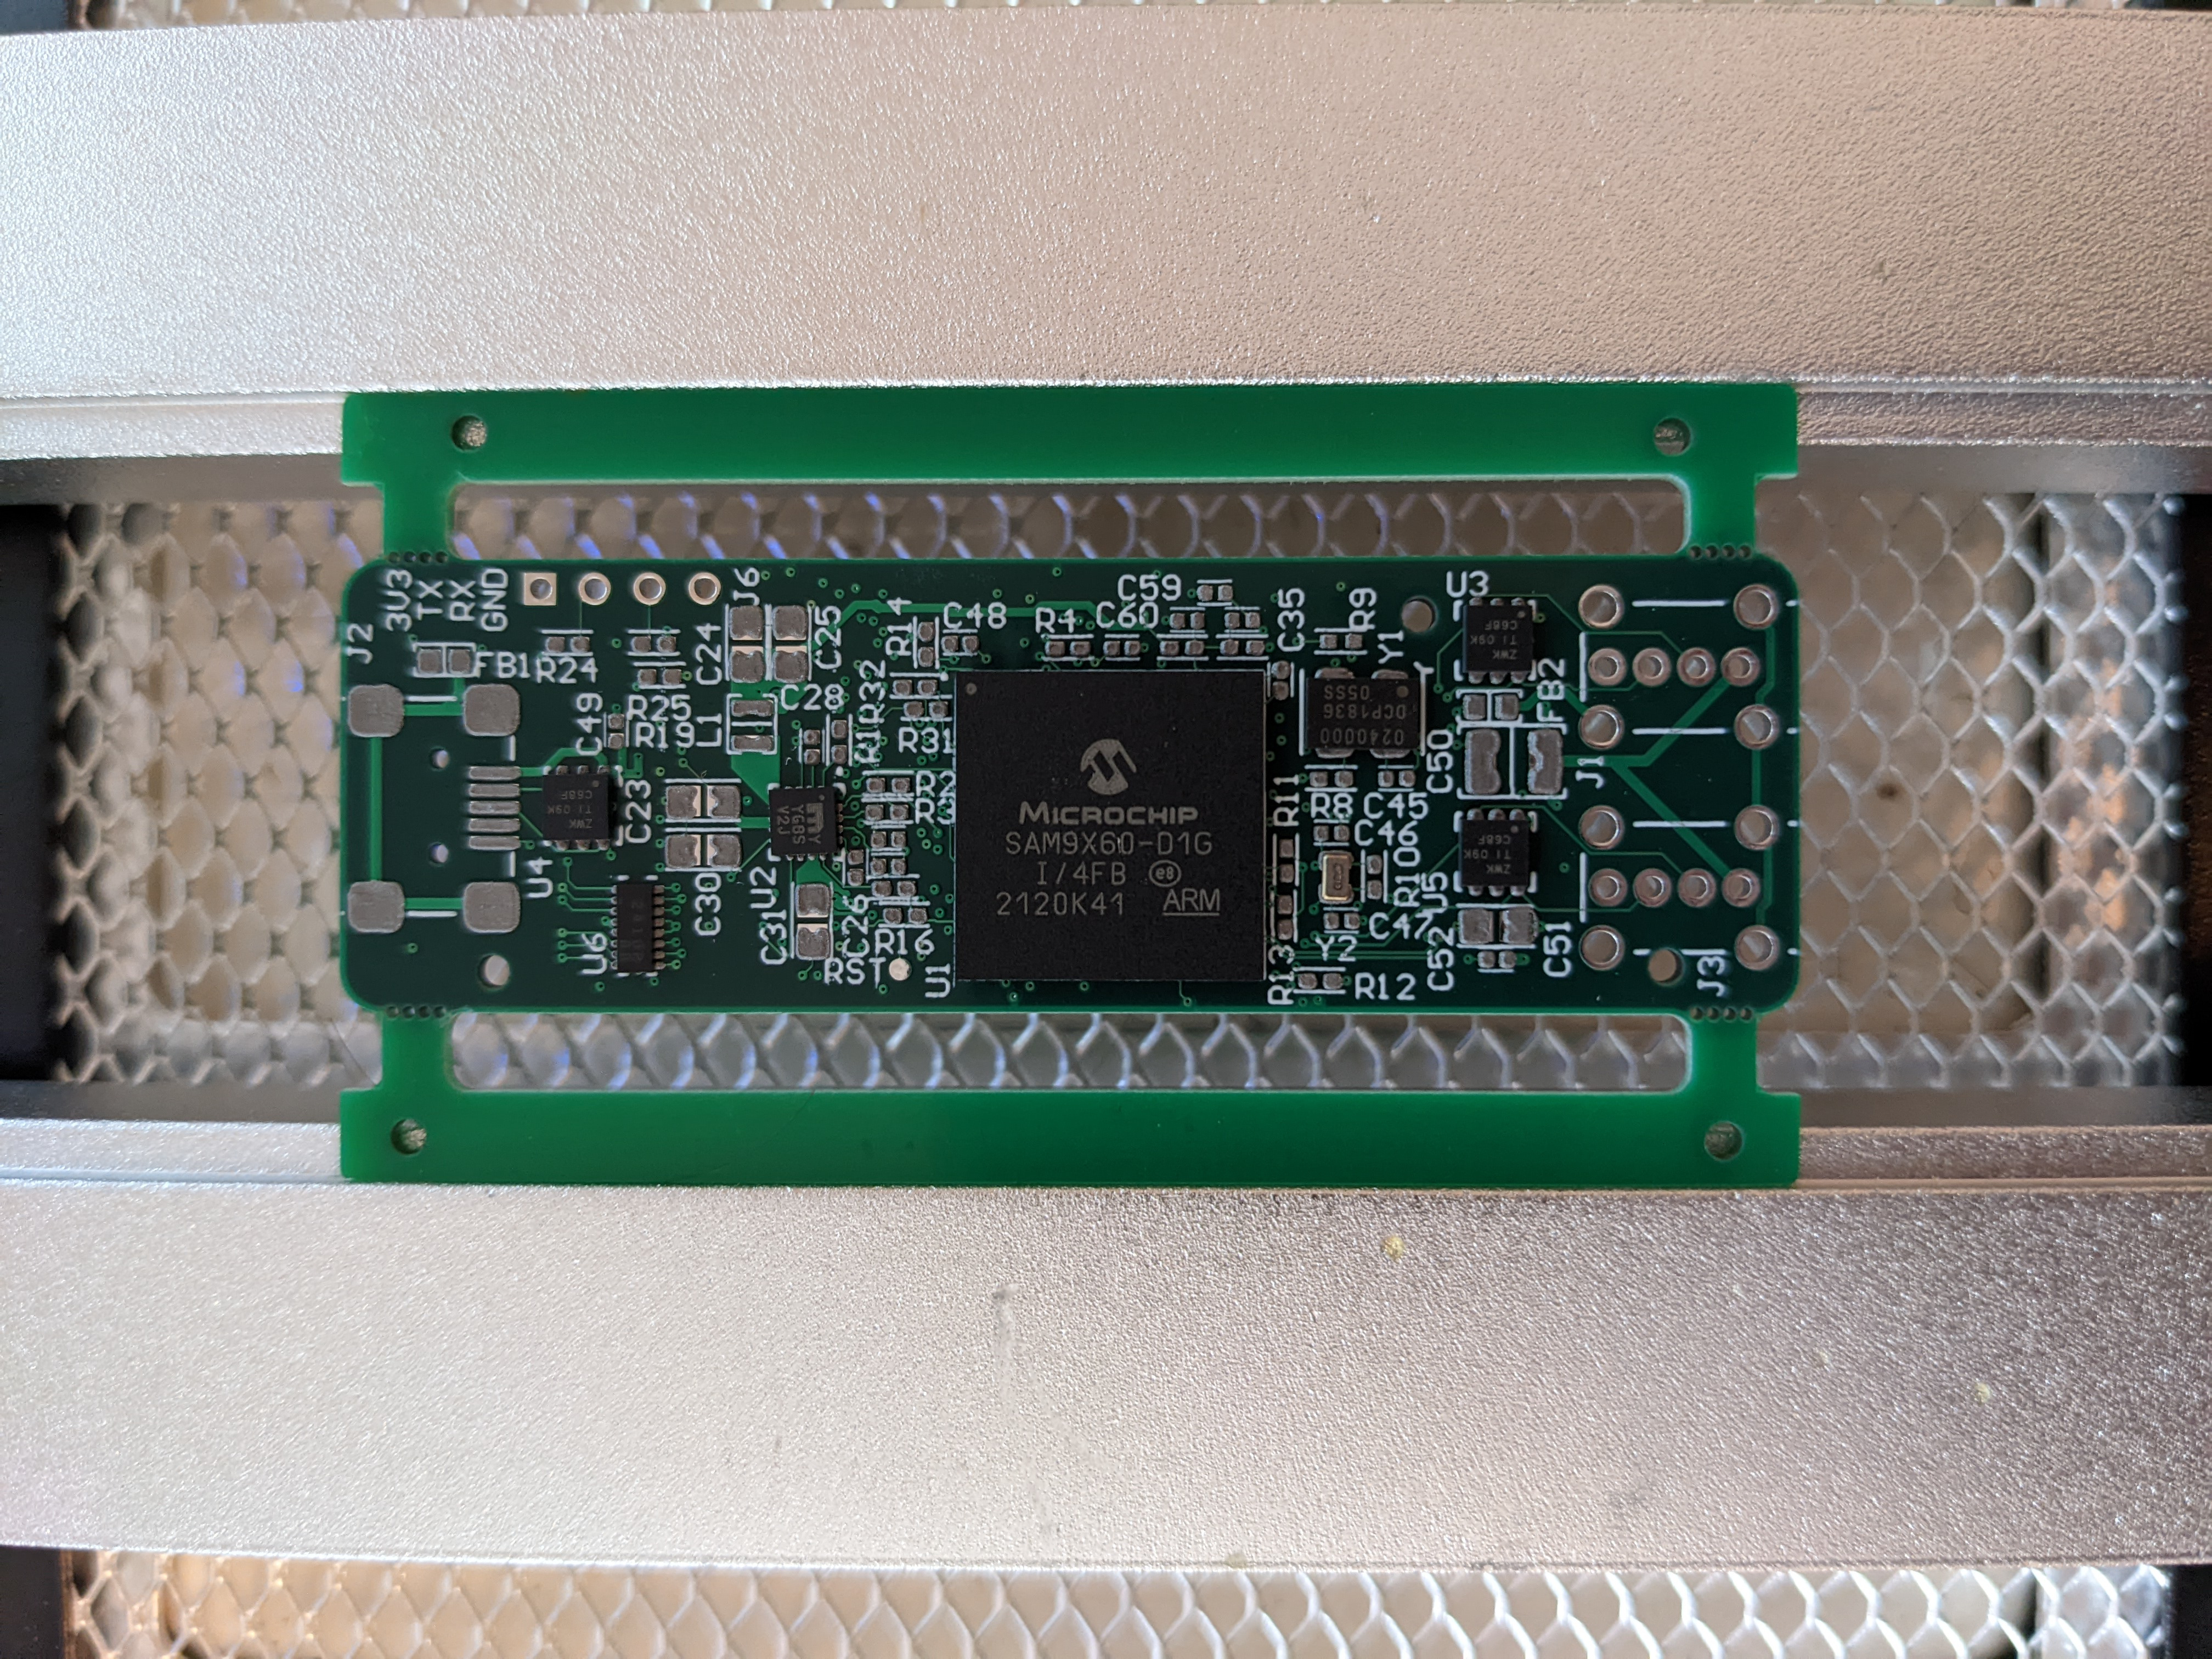 The PCB clamped onto a preheater, with some integrated circuits placed.